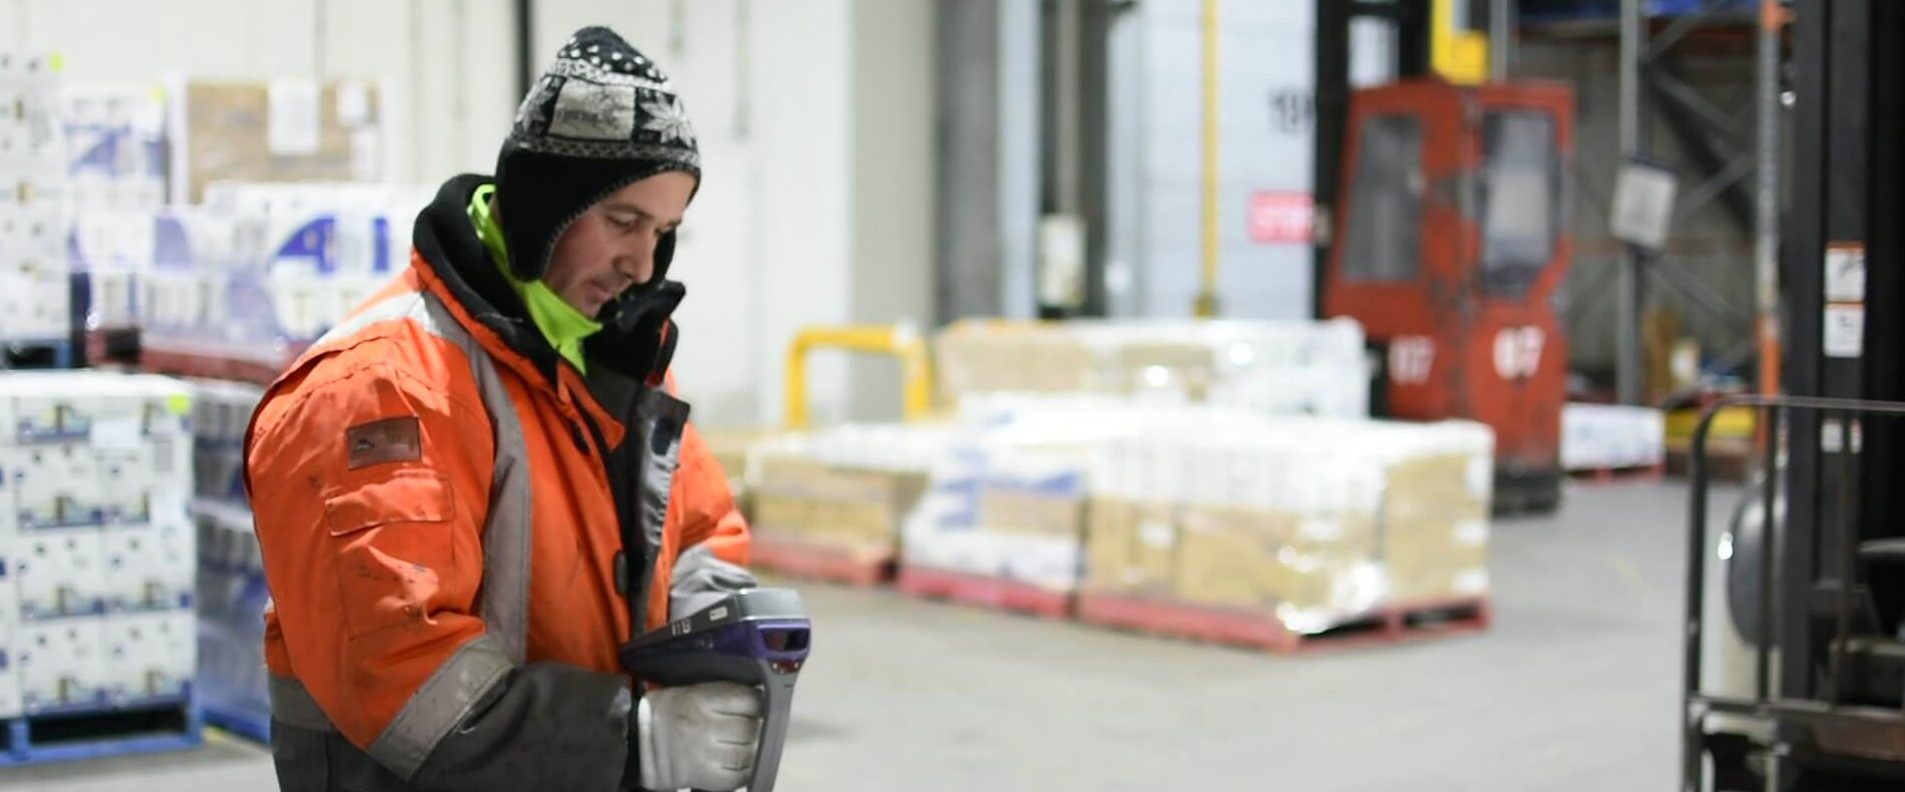 3 REASONS WHY FREEZER SUITS ARE ESSENTIAL FOR WORKING IN THE COLD